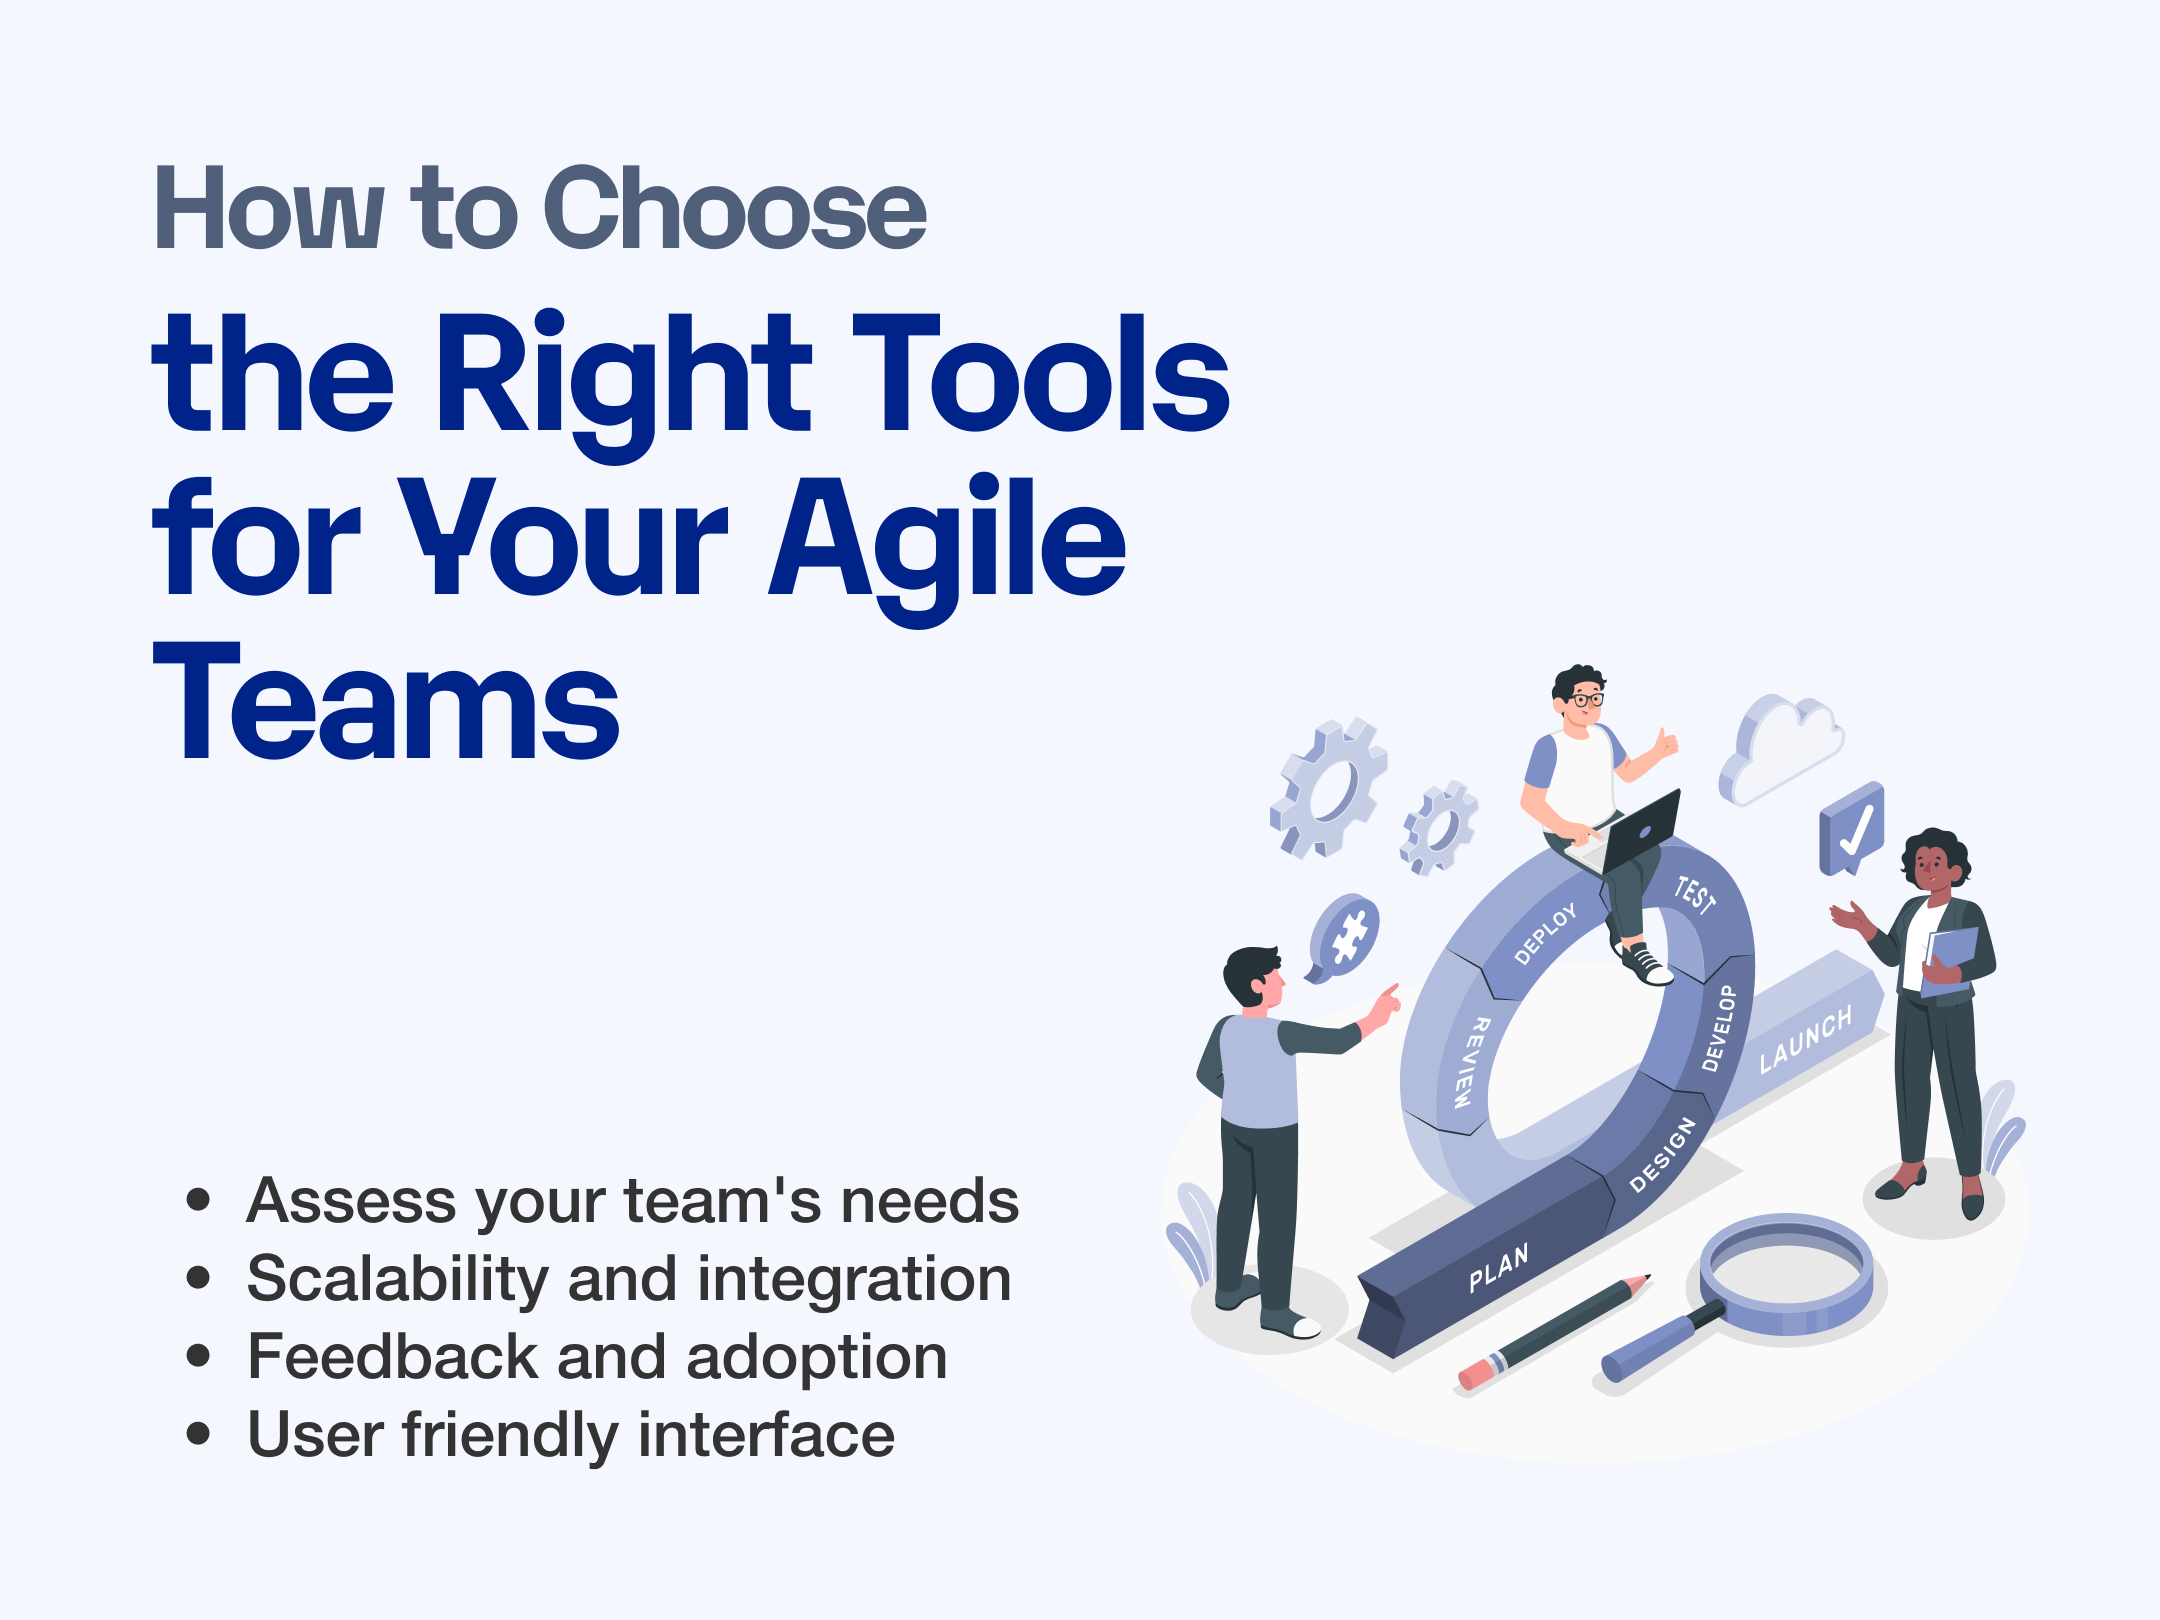 How to use the right tools for Agile Scaling